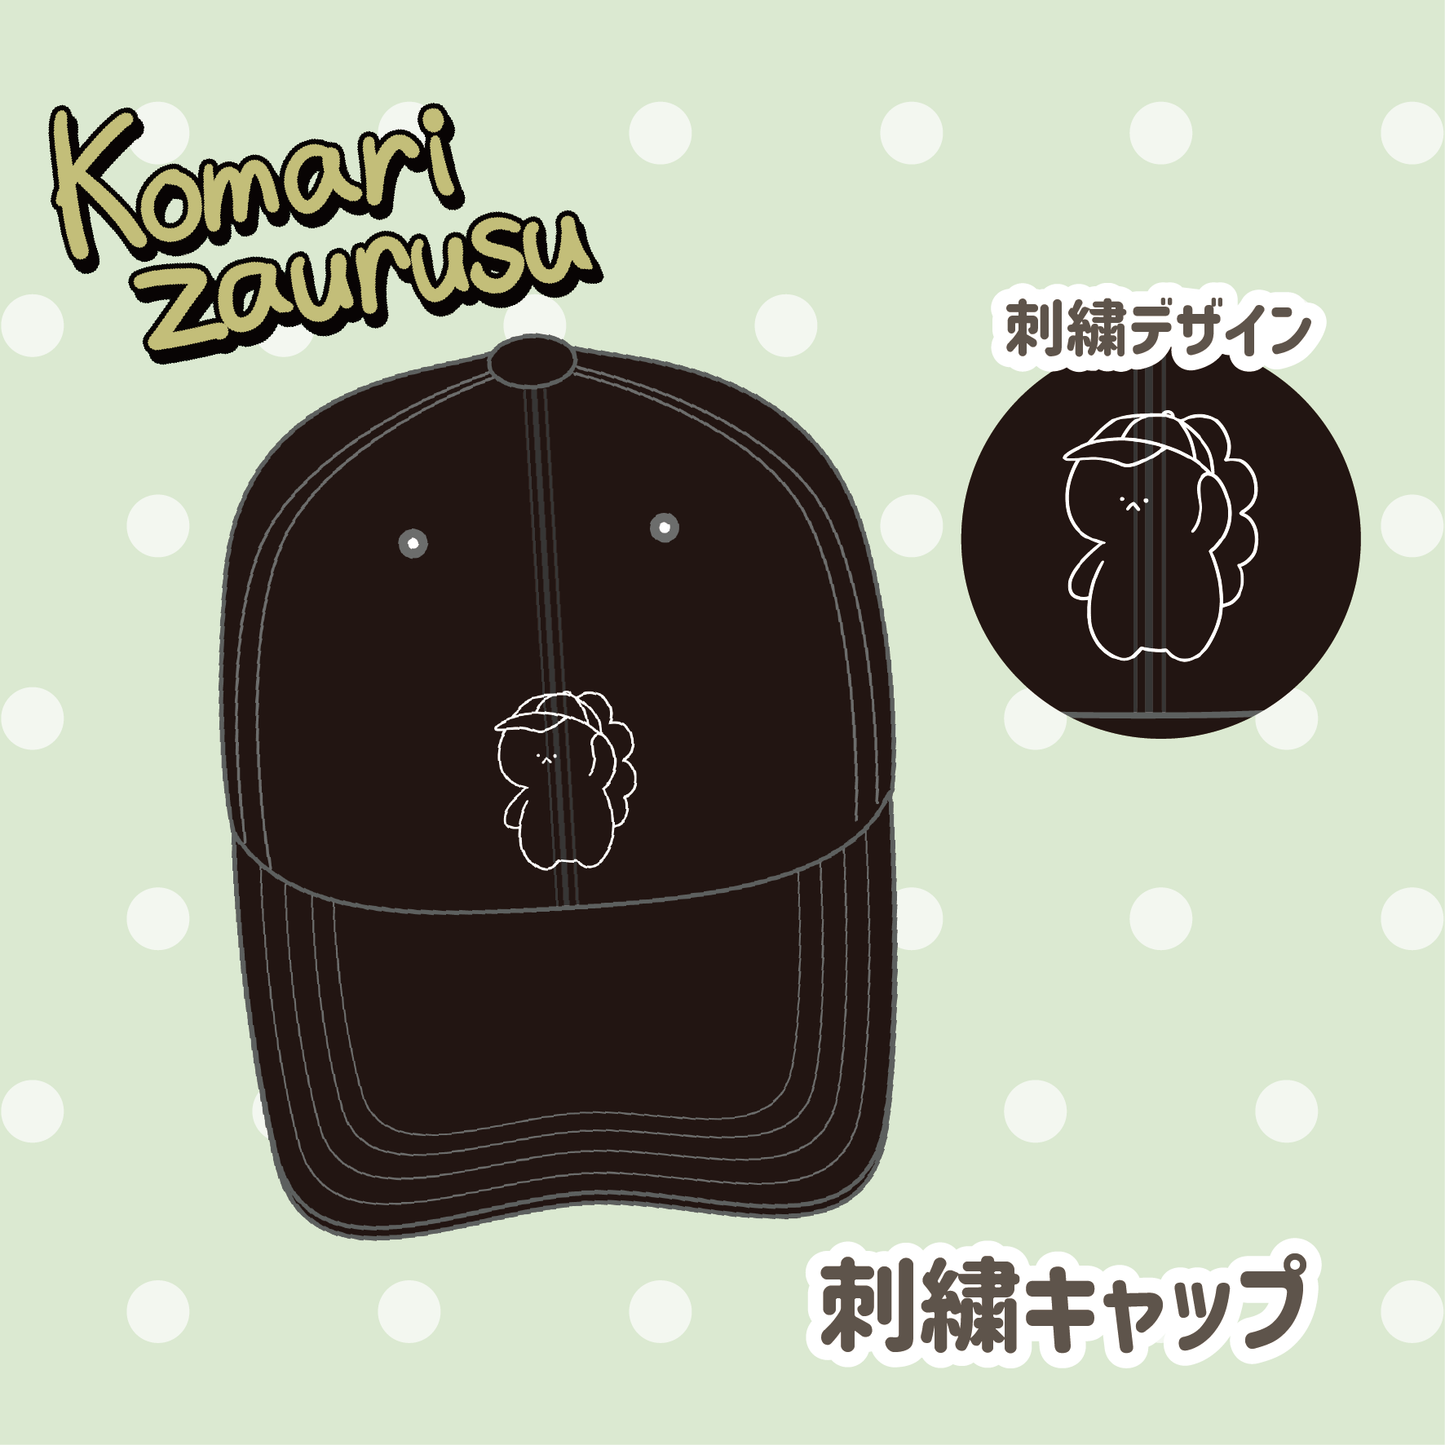 [Troublesome Zaurus] Embroidered cap [Shipped in early January]